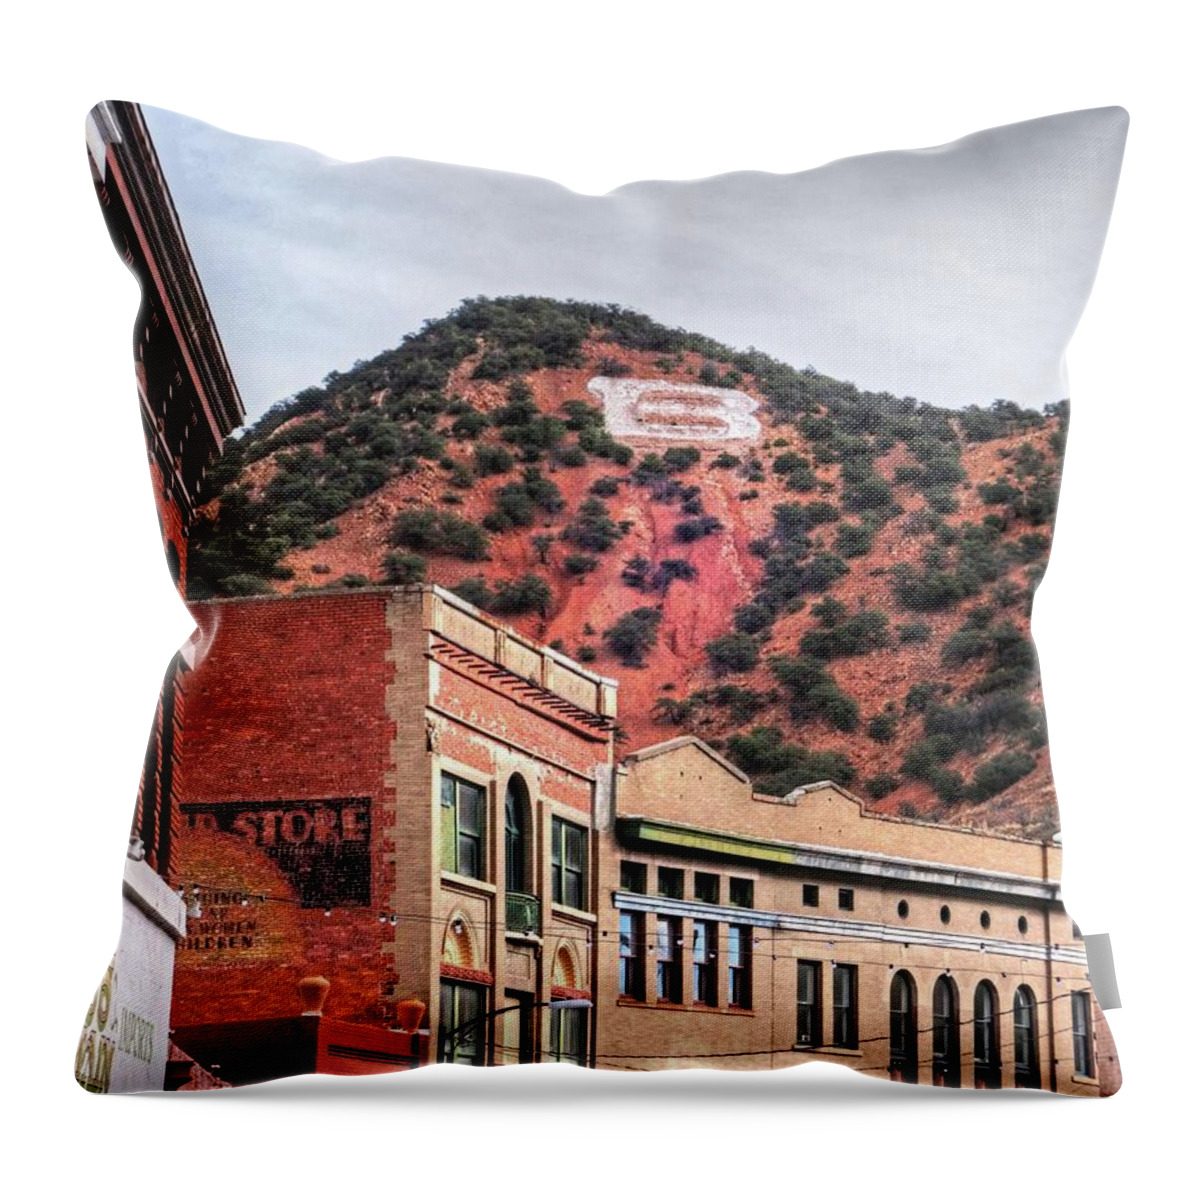 Bisbee Throw Pillow featuring the photograph B is for Bisbee Bisbee Arizona by Toby McGuire